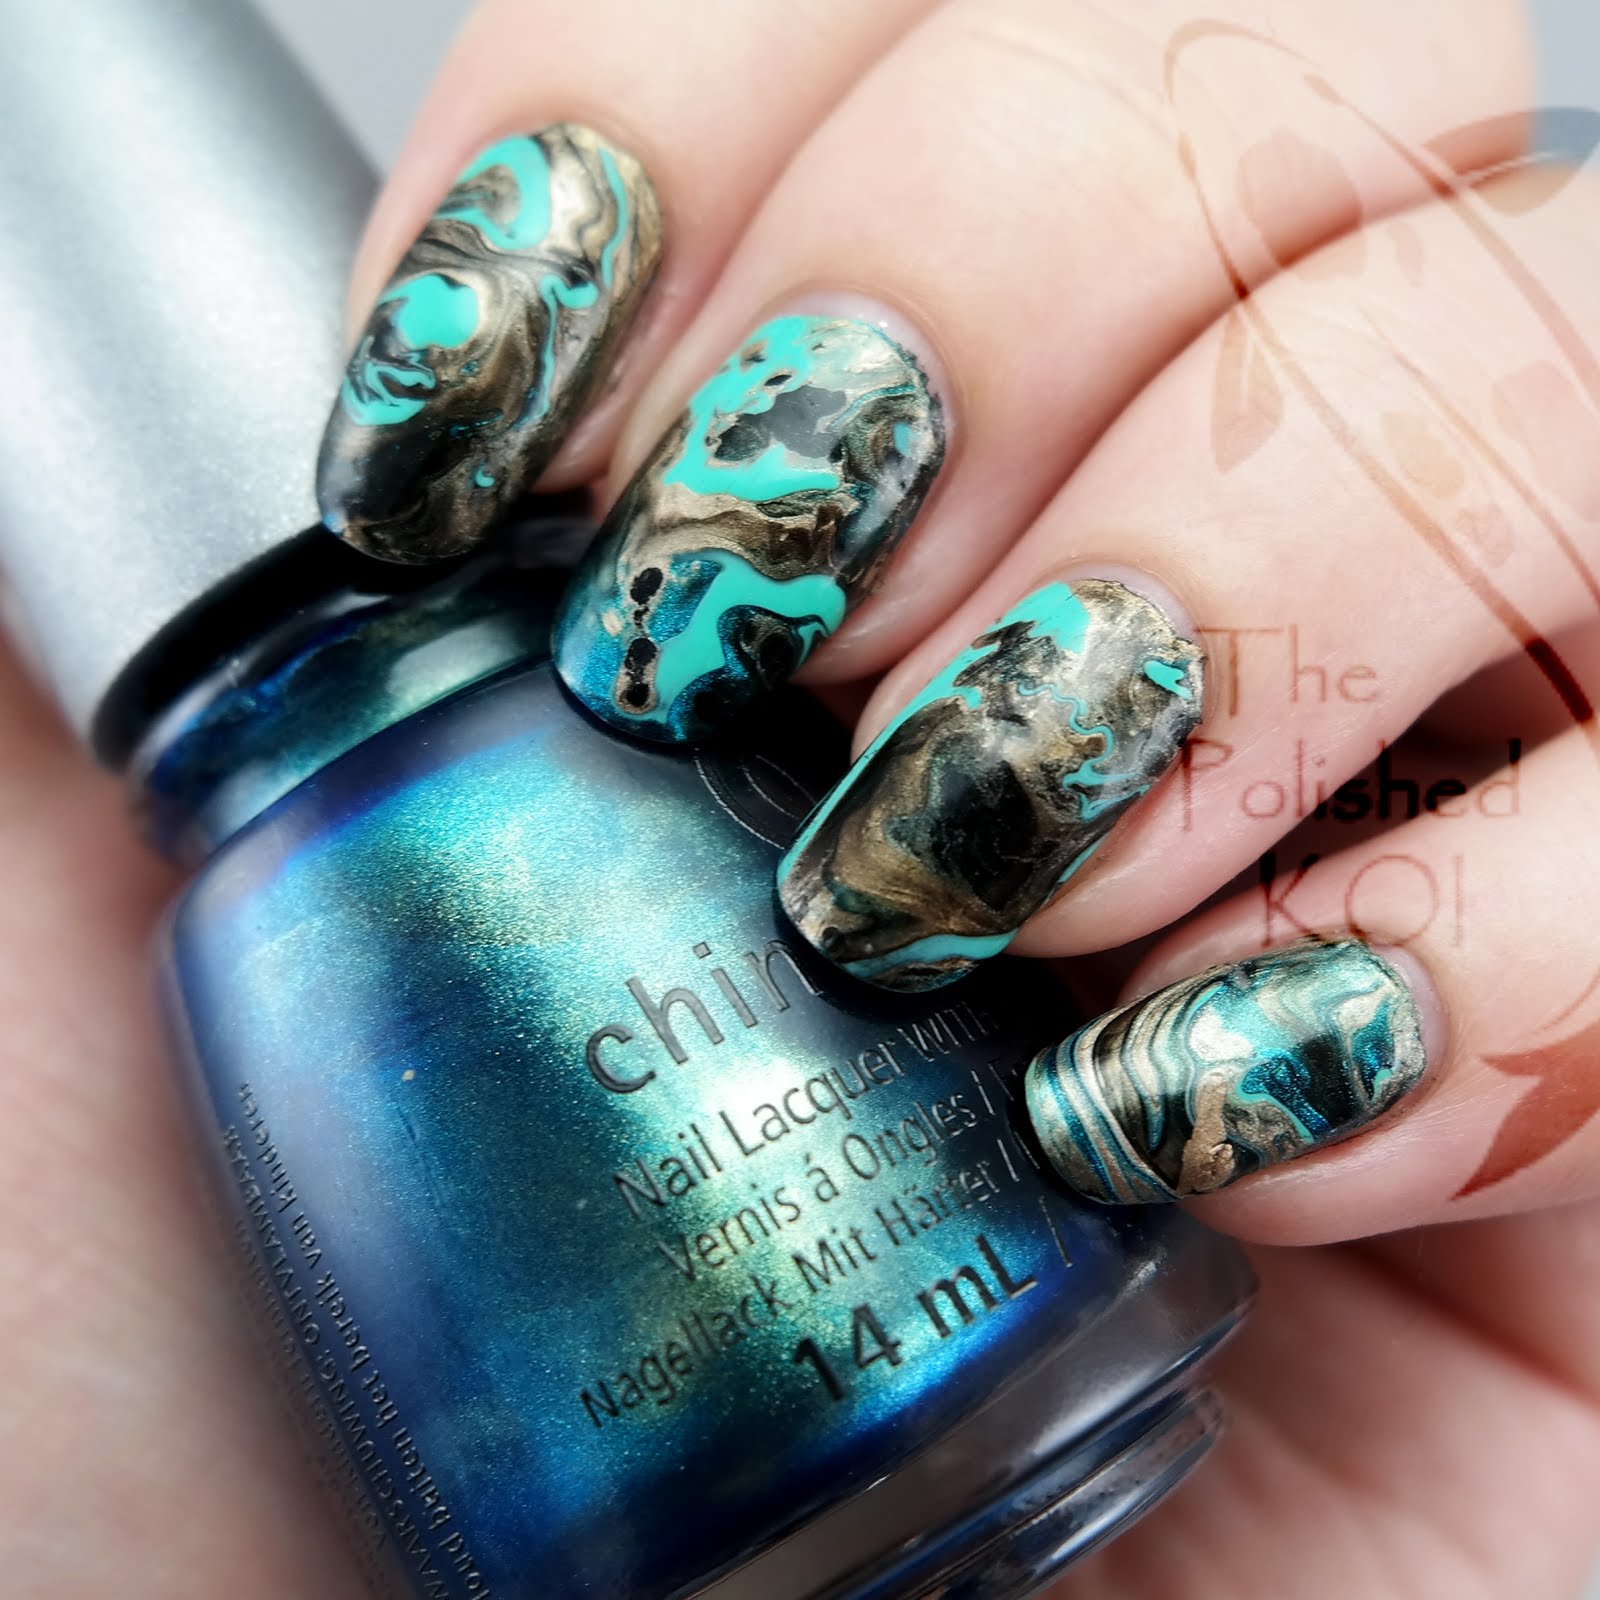 The Polished KOI: Drip Marble - no water needed!